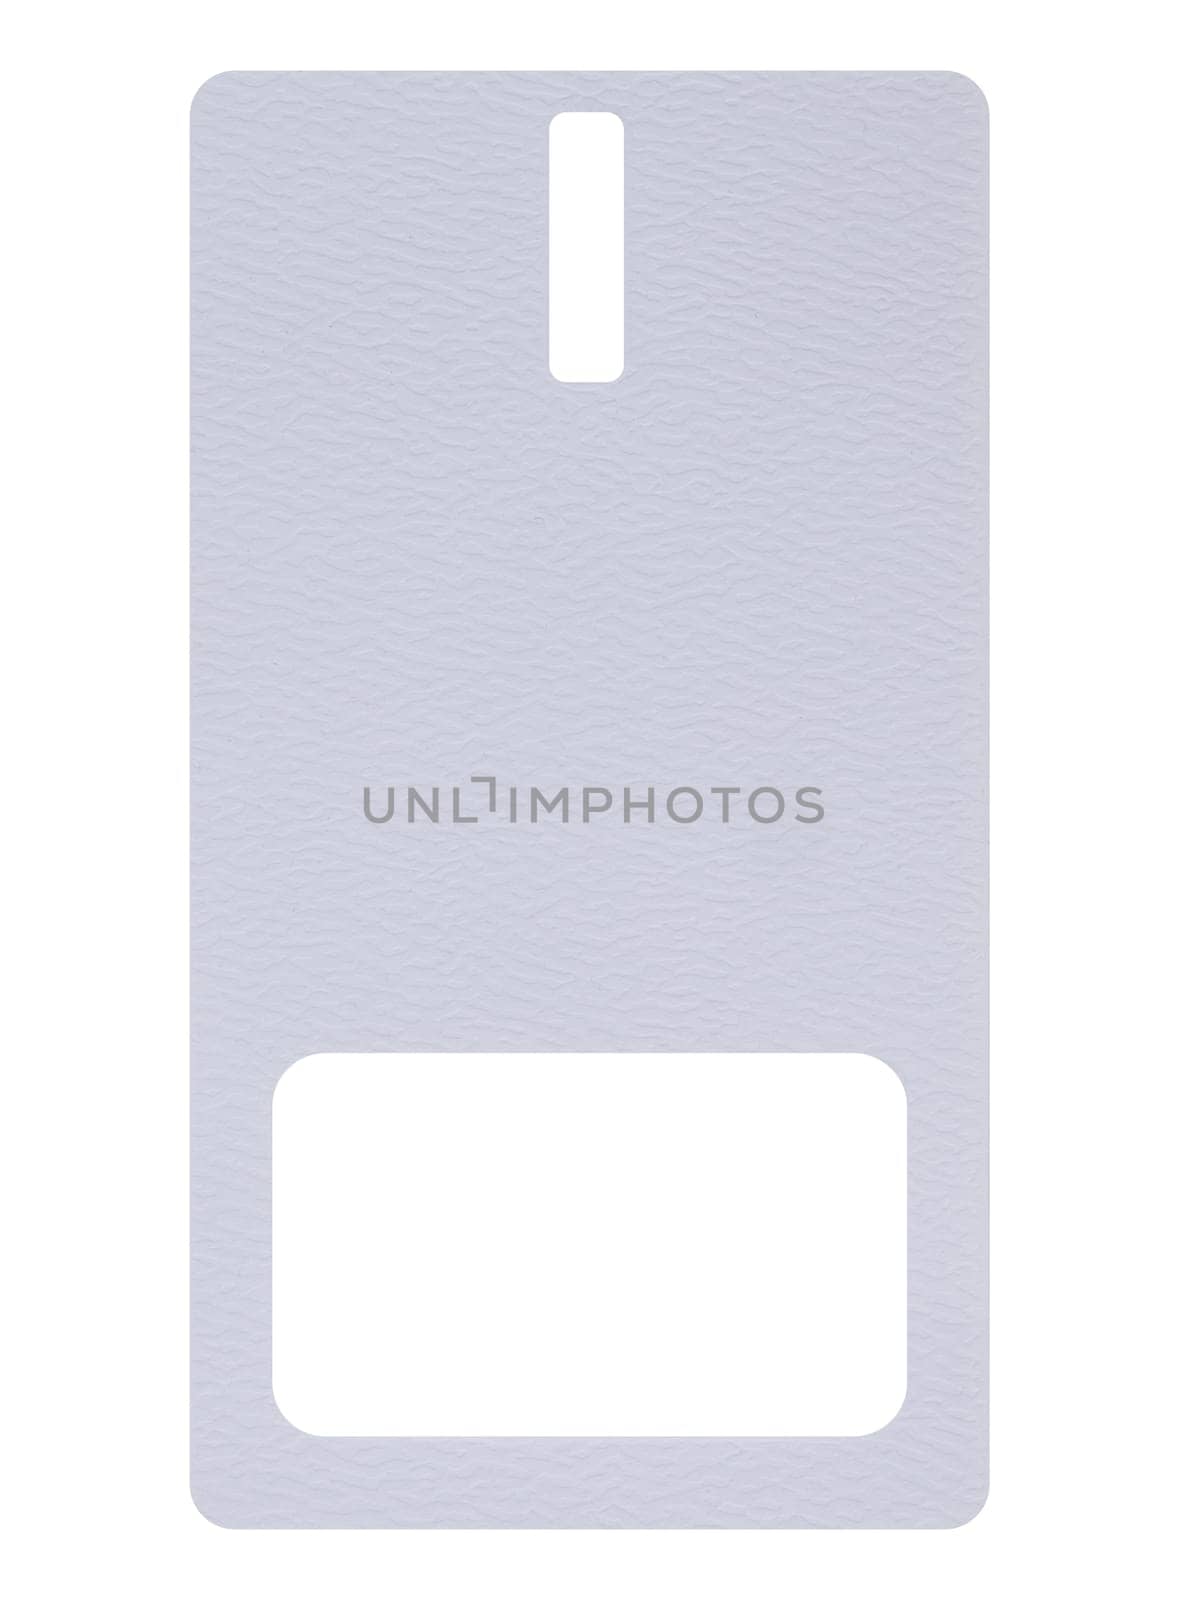 Blank white paper tag, price tag for product